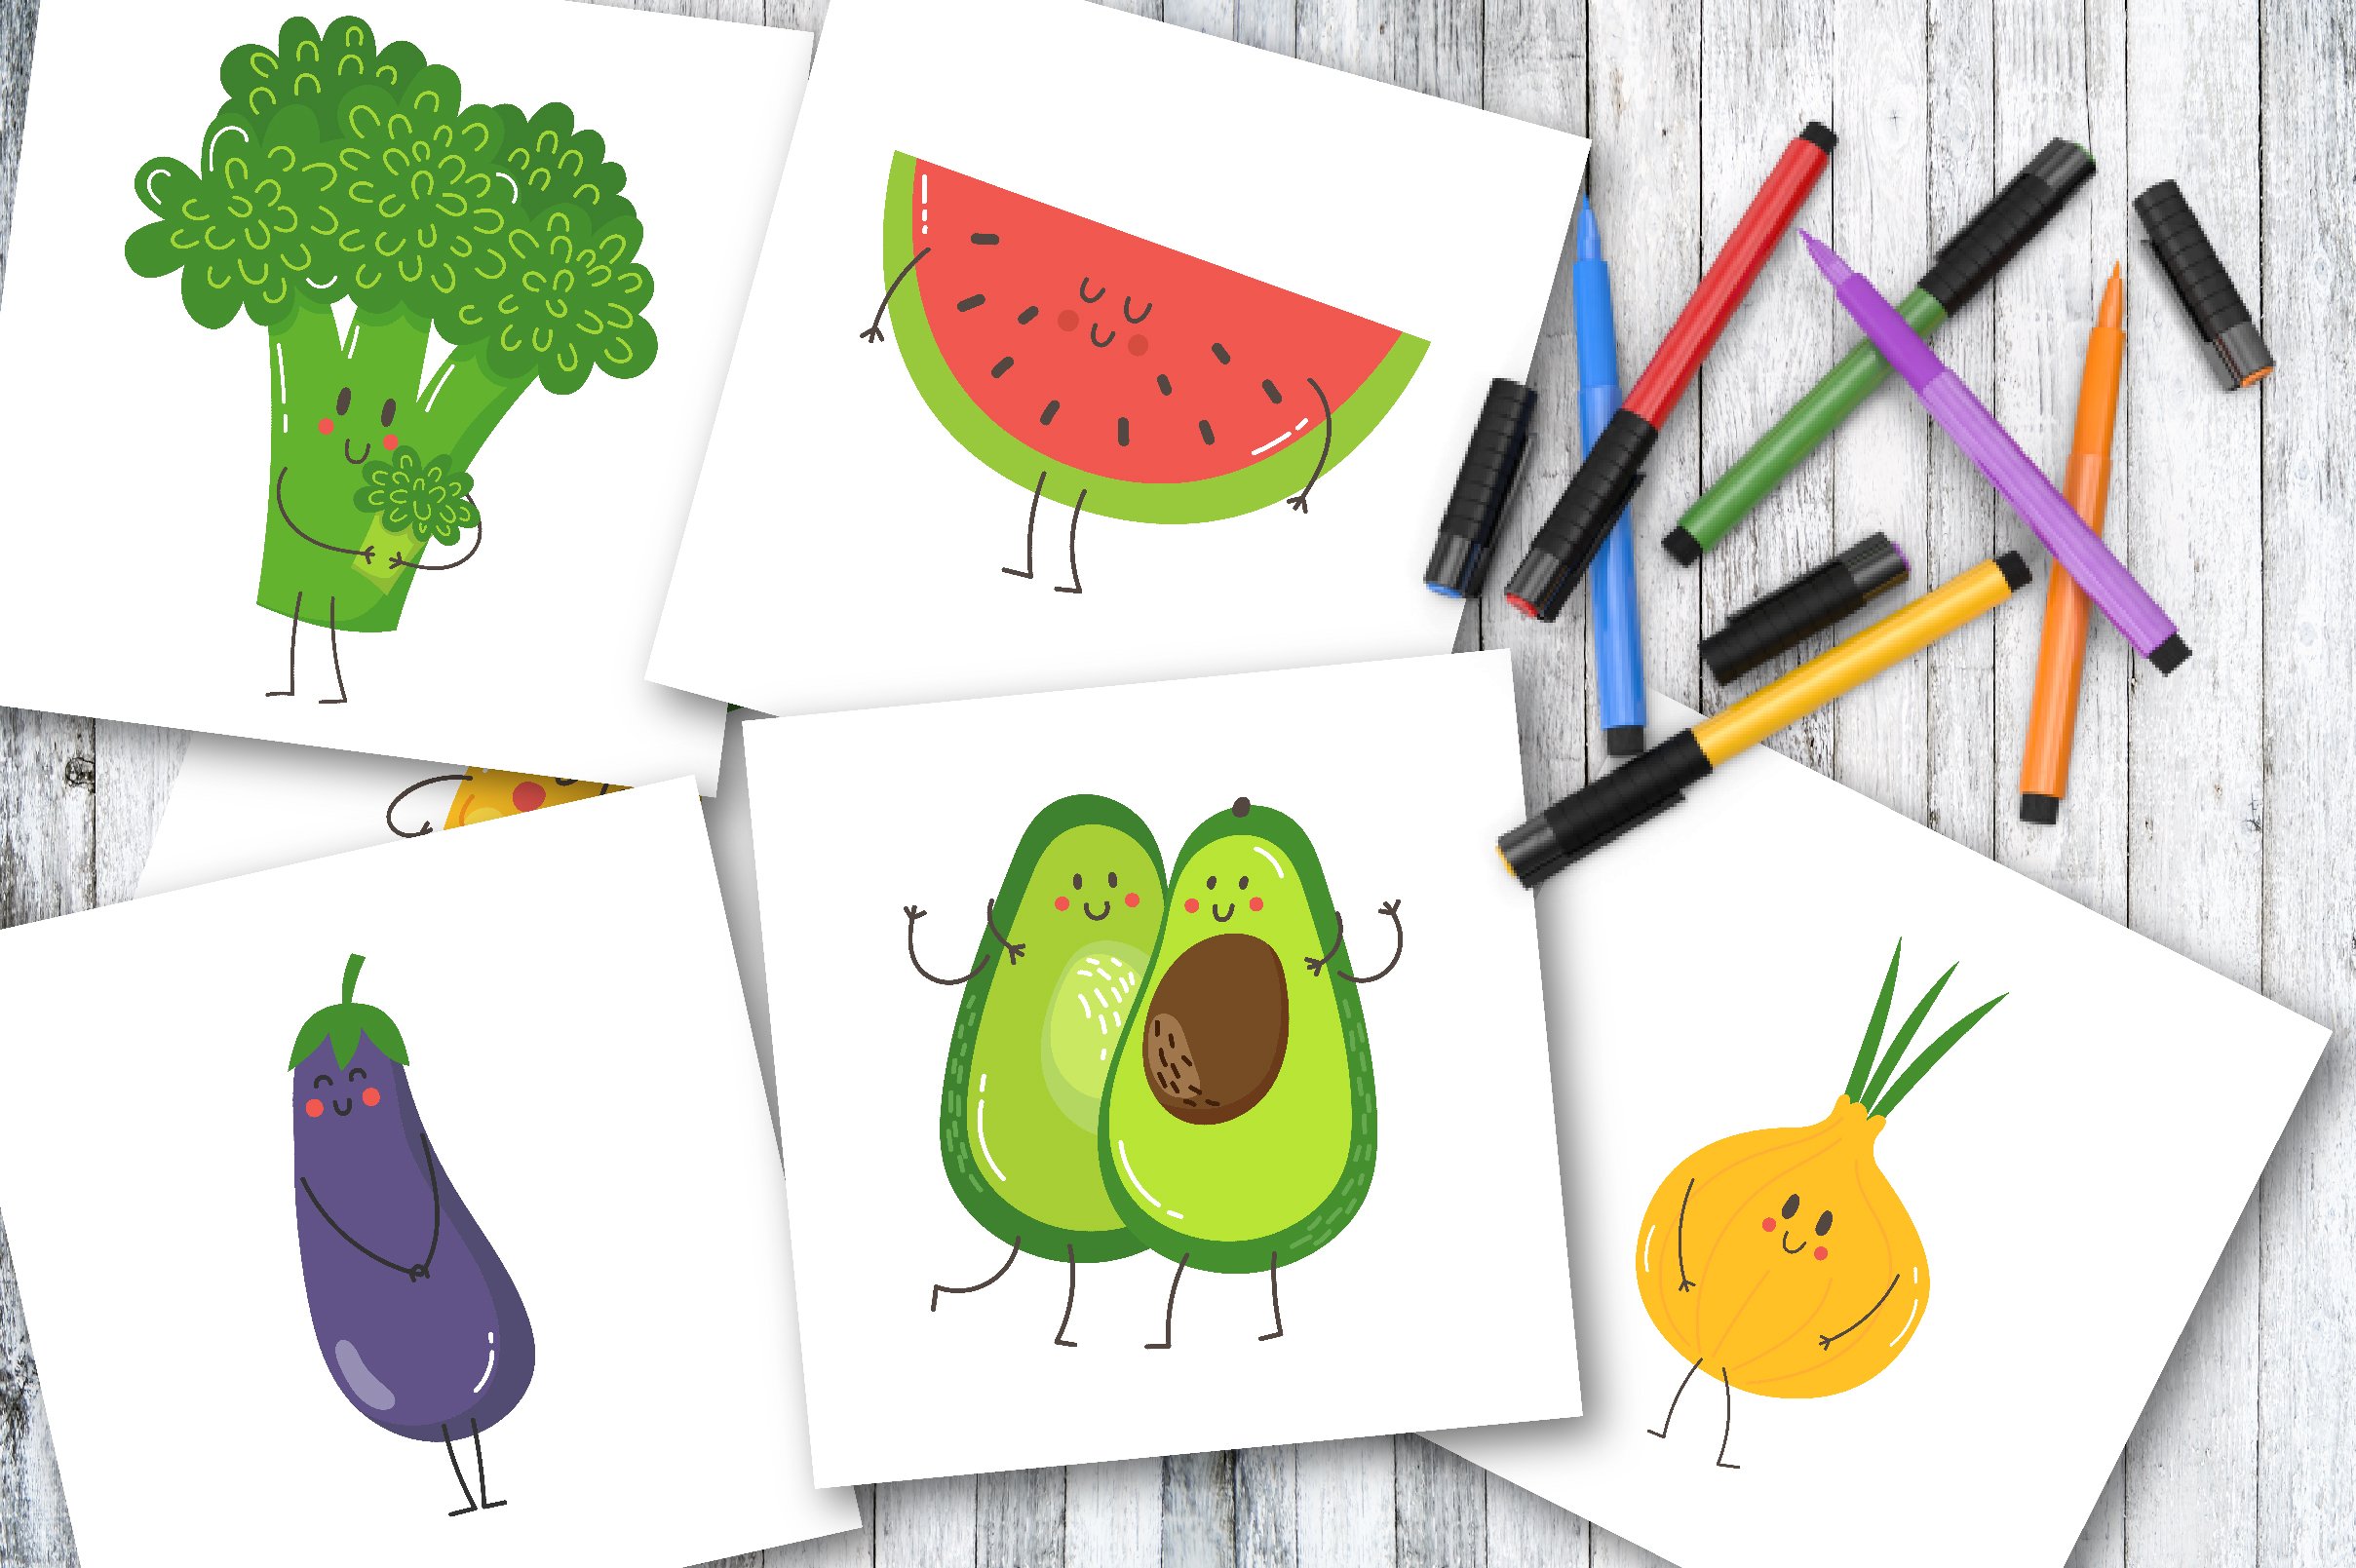 Hand Drawn Cartoon Gourmet Simple Fruit And Vegetable, Fruits, Vegetables,  Cartoon Fruits And Vegetables PNG Image PSD images free download_1369 ×  1024 px - Lovepik